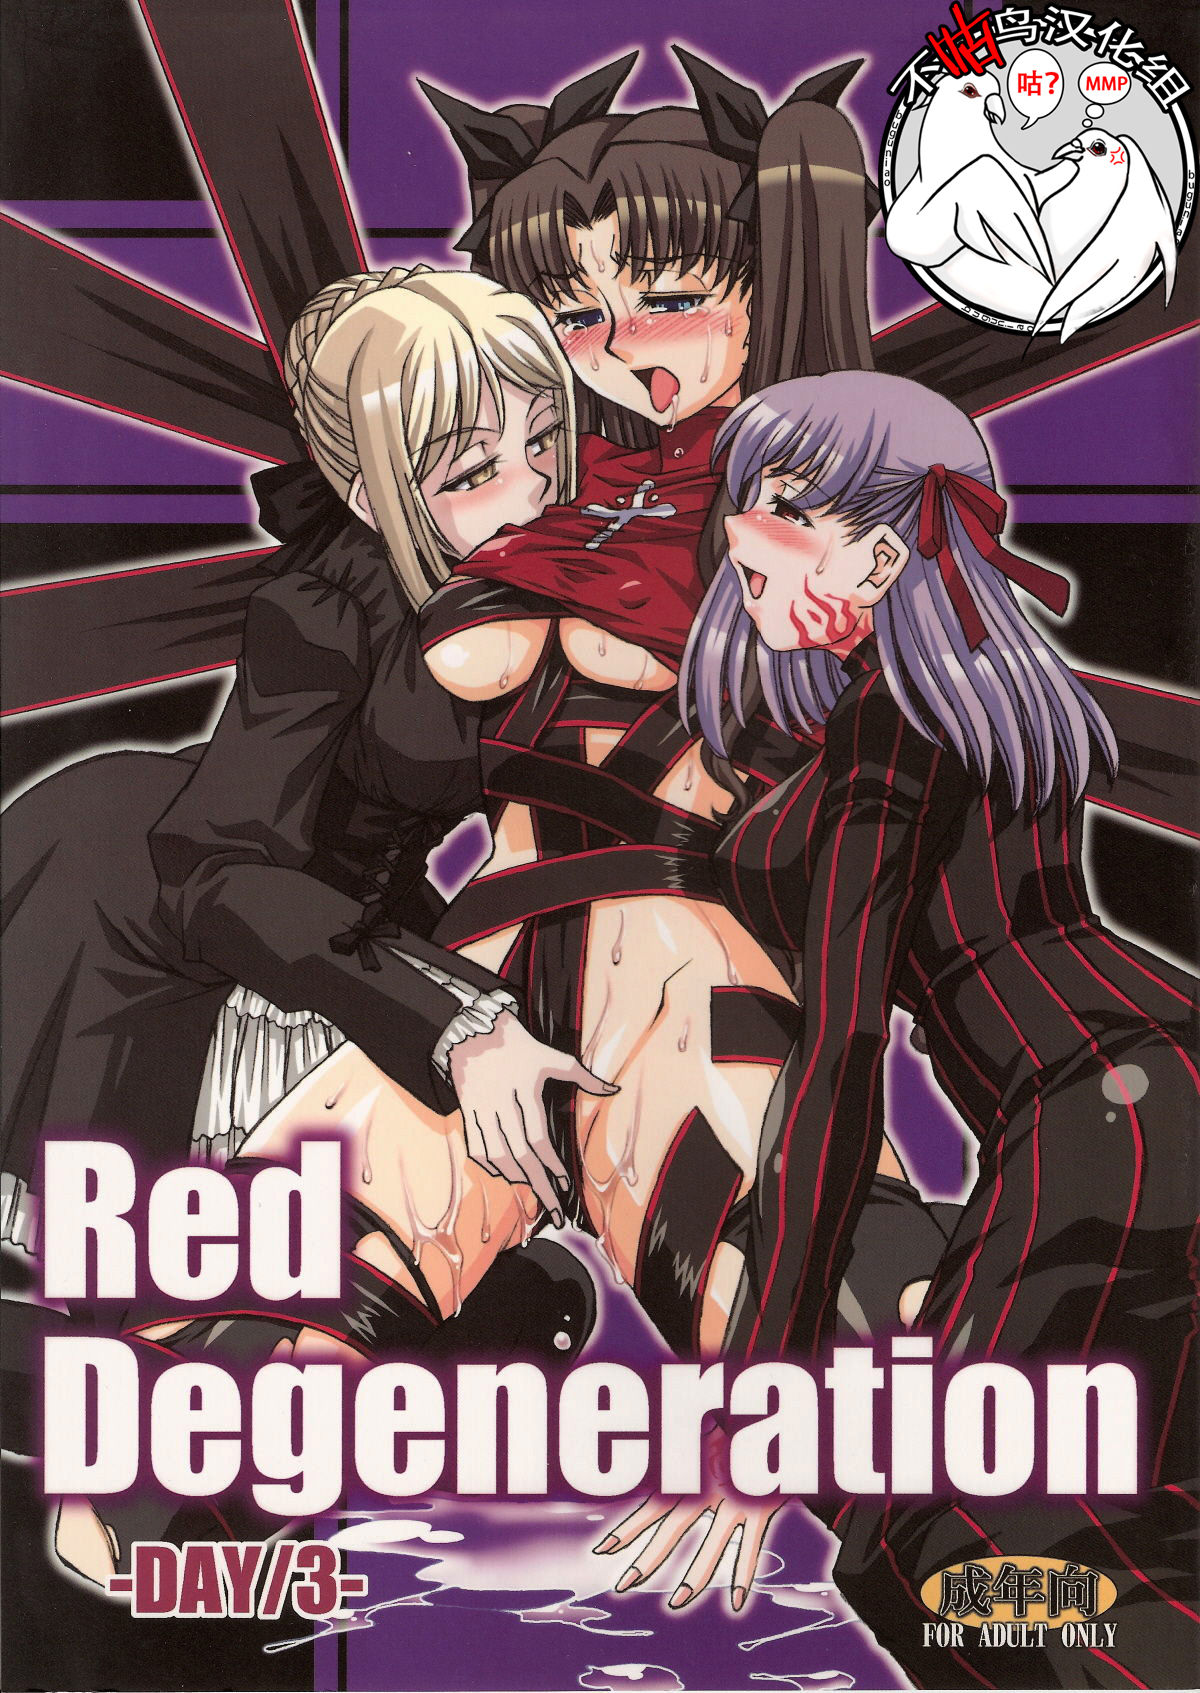 (COMIC1☆2) [H.B (B-RIVER)] Red Degeneration -DAY/3- (Fate/stay night) [Chinese] [不咕鸟汉化组] page 1 full